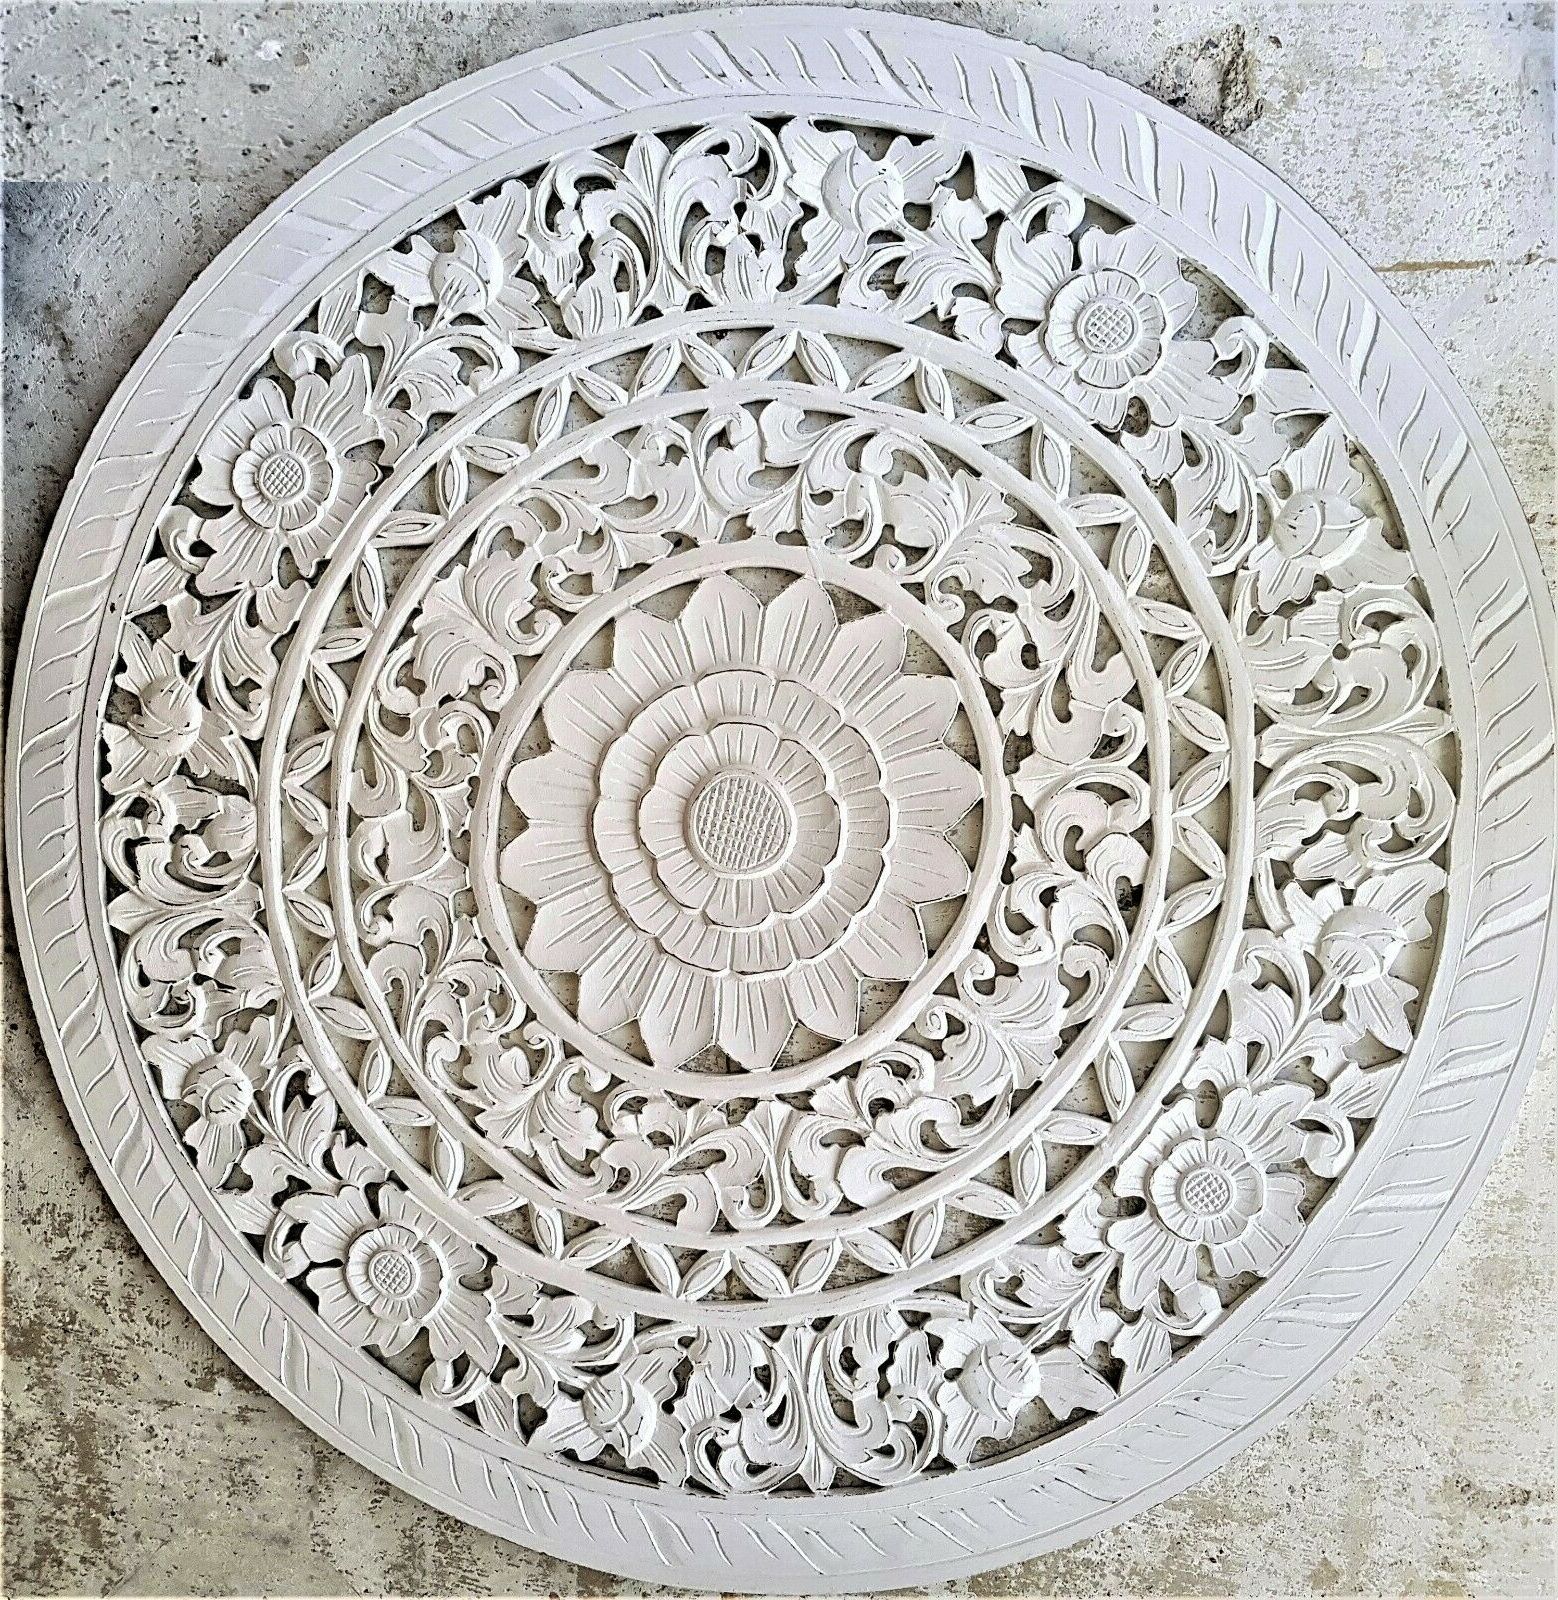 Widely Used Mandala Shabby Chic White Wall Art Hanging Wood Panel Inside Tropical Wood Wall Art (View 4 of 20)